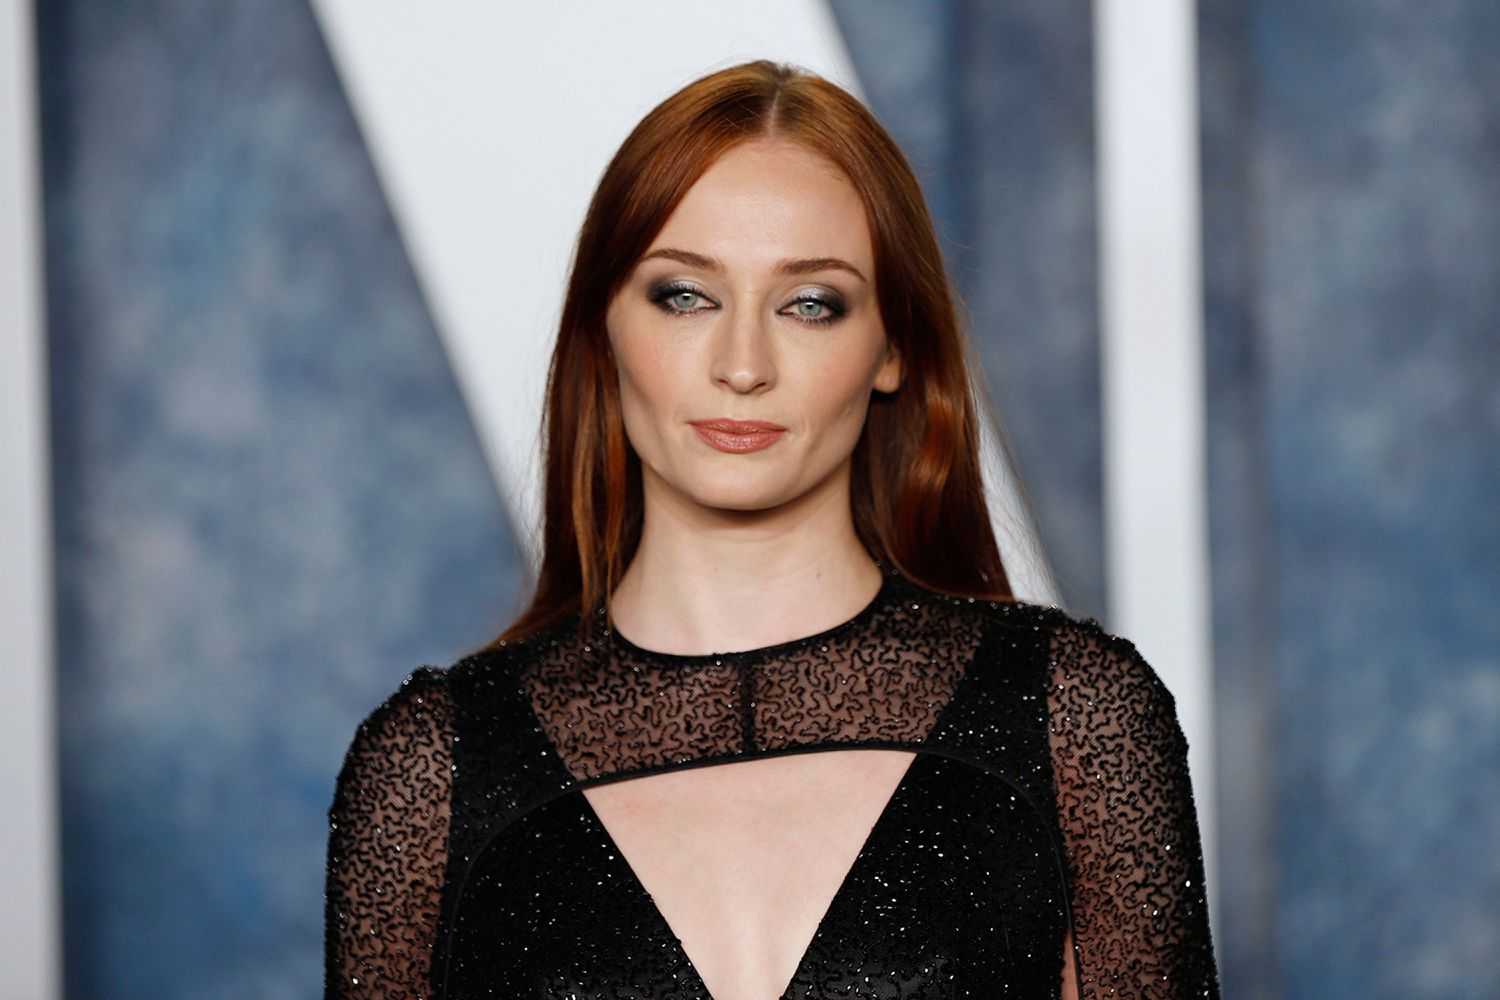 'A mother in despair swept up in the exhilarating world of crime' - Sophie Turner's transformation from Sansa Stark to The Godmother in new ITV drama